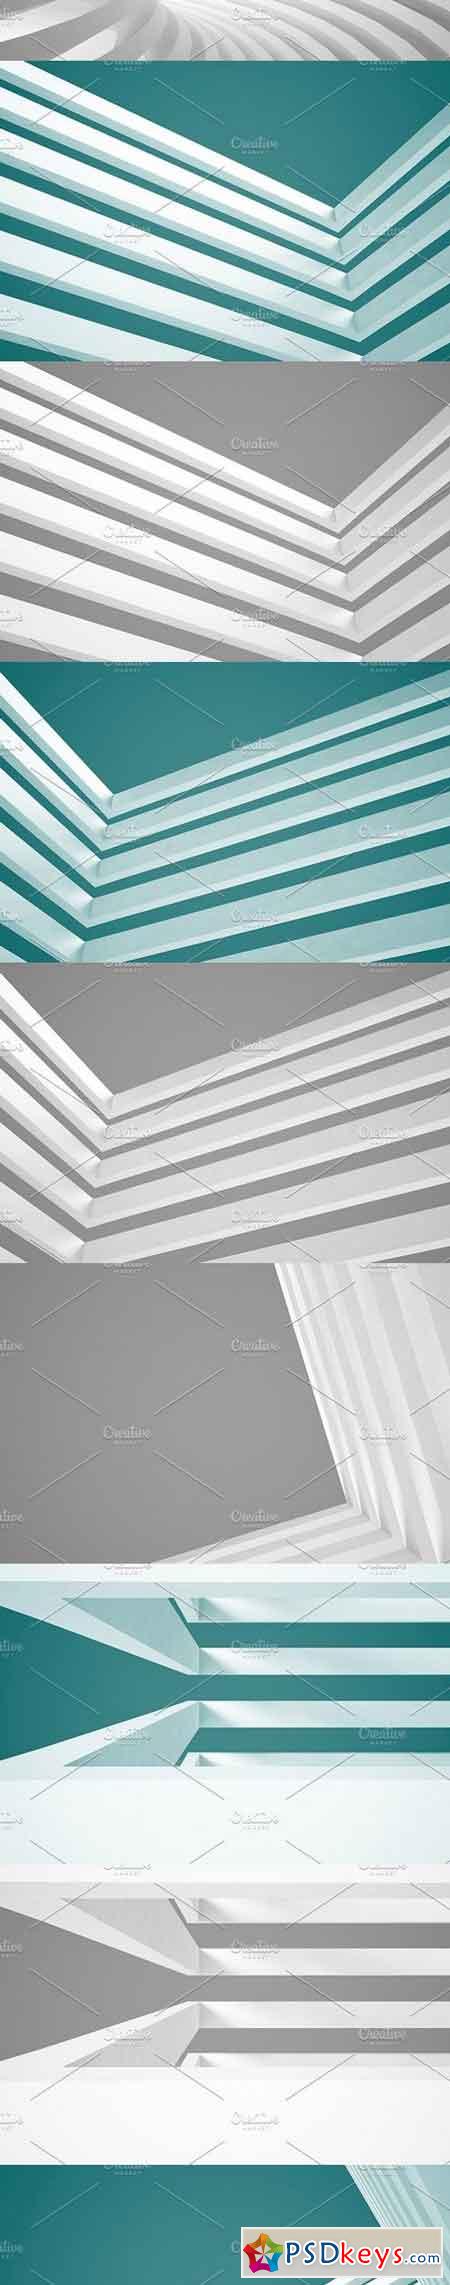 38 Abstract Architecture Backgrounds 1256994